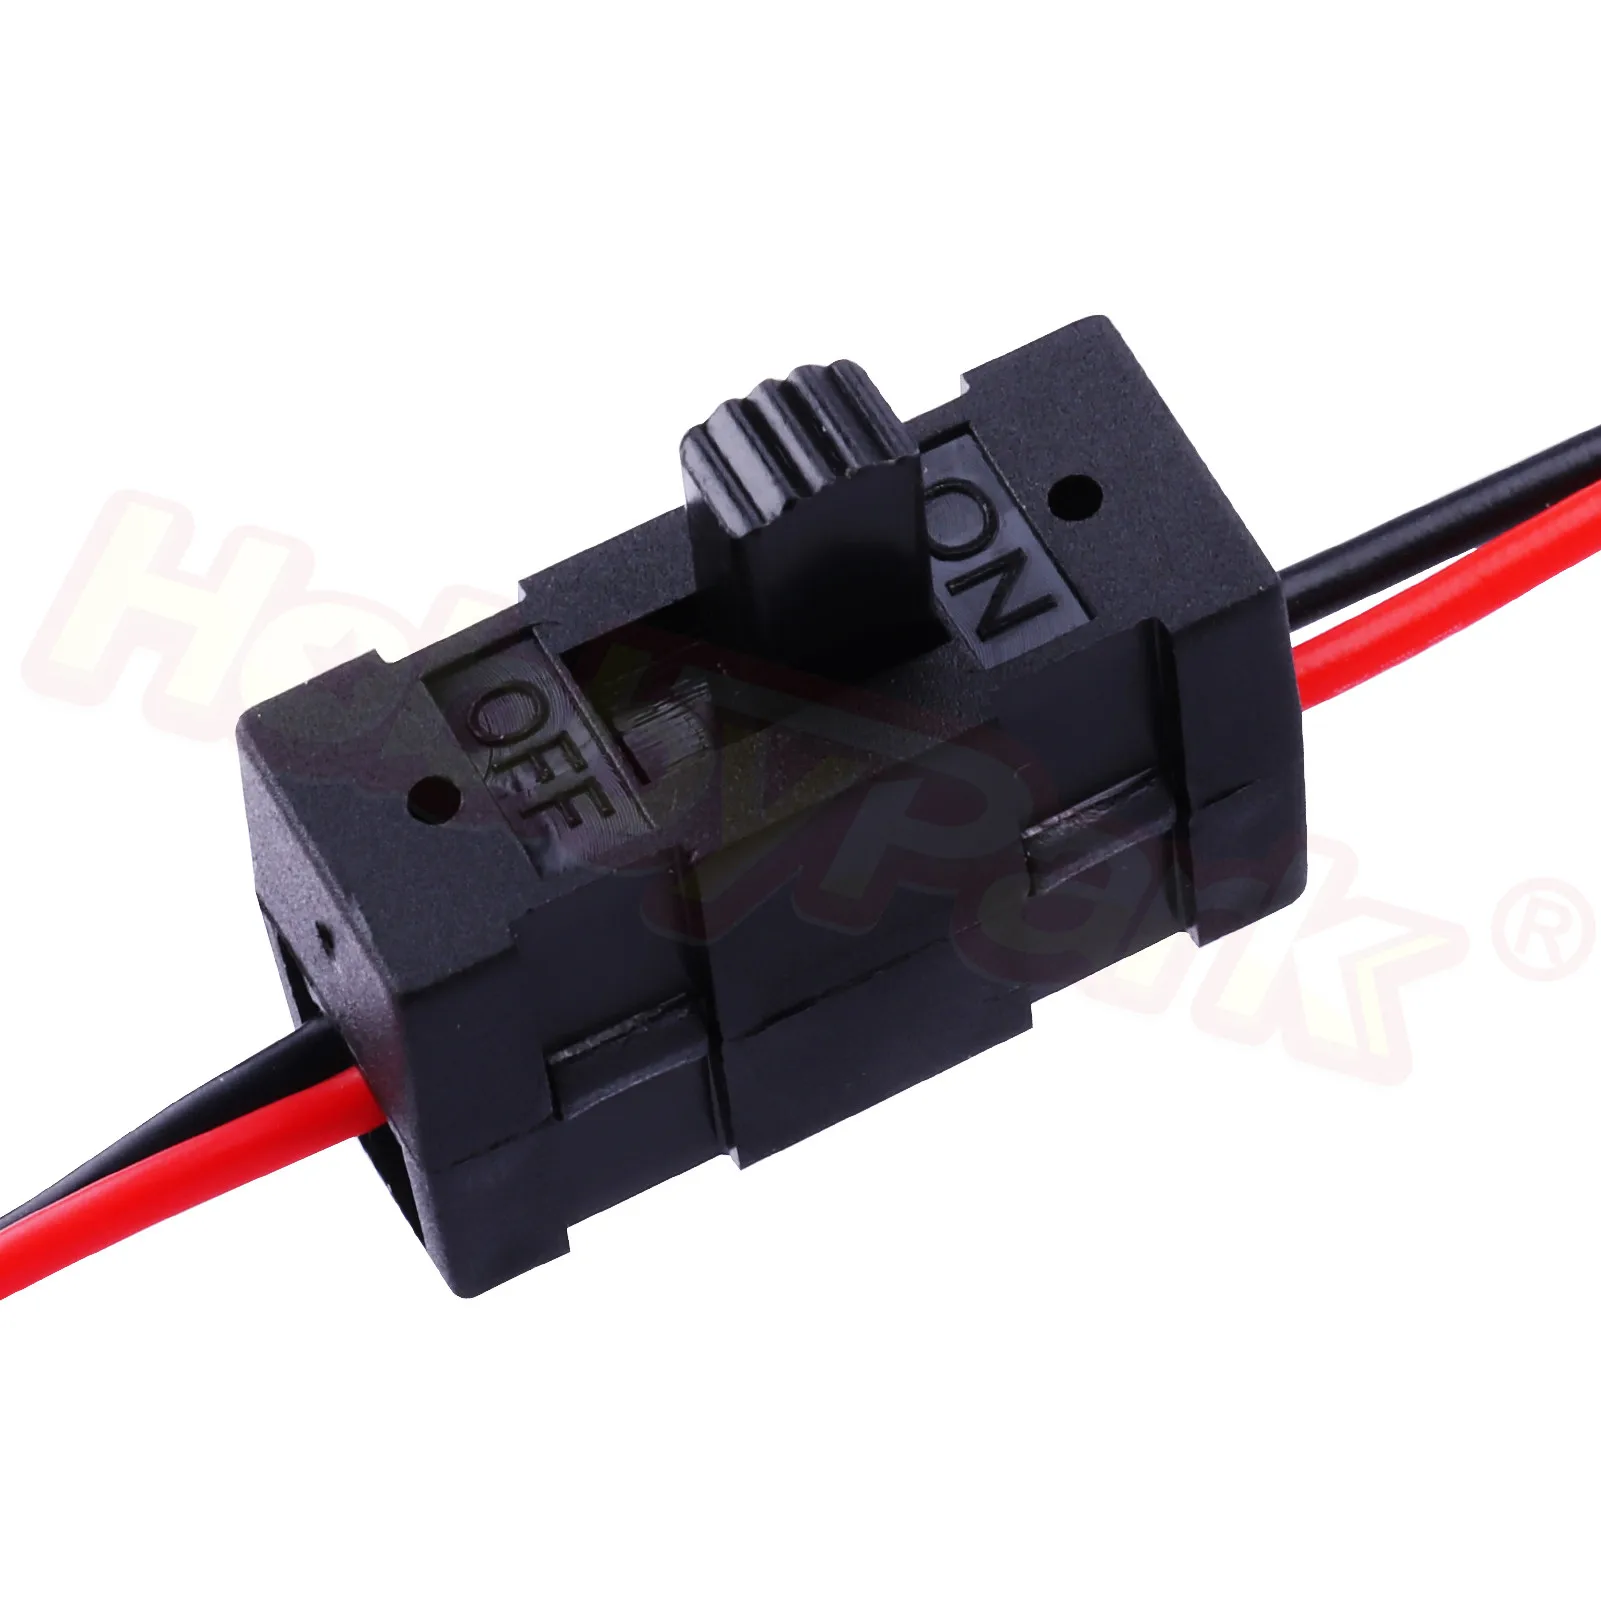 RC 1:10 On-Road Car/Buggy/Truck On/Off JST Connector For HSP 02050 Part 